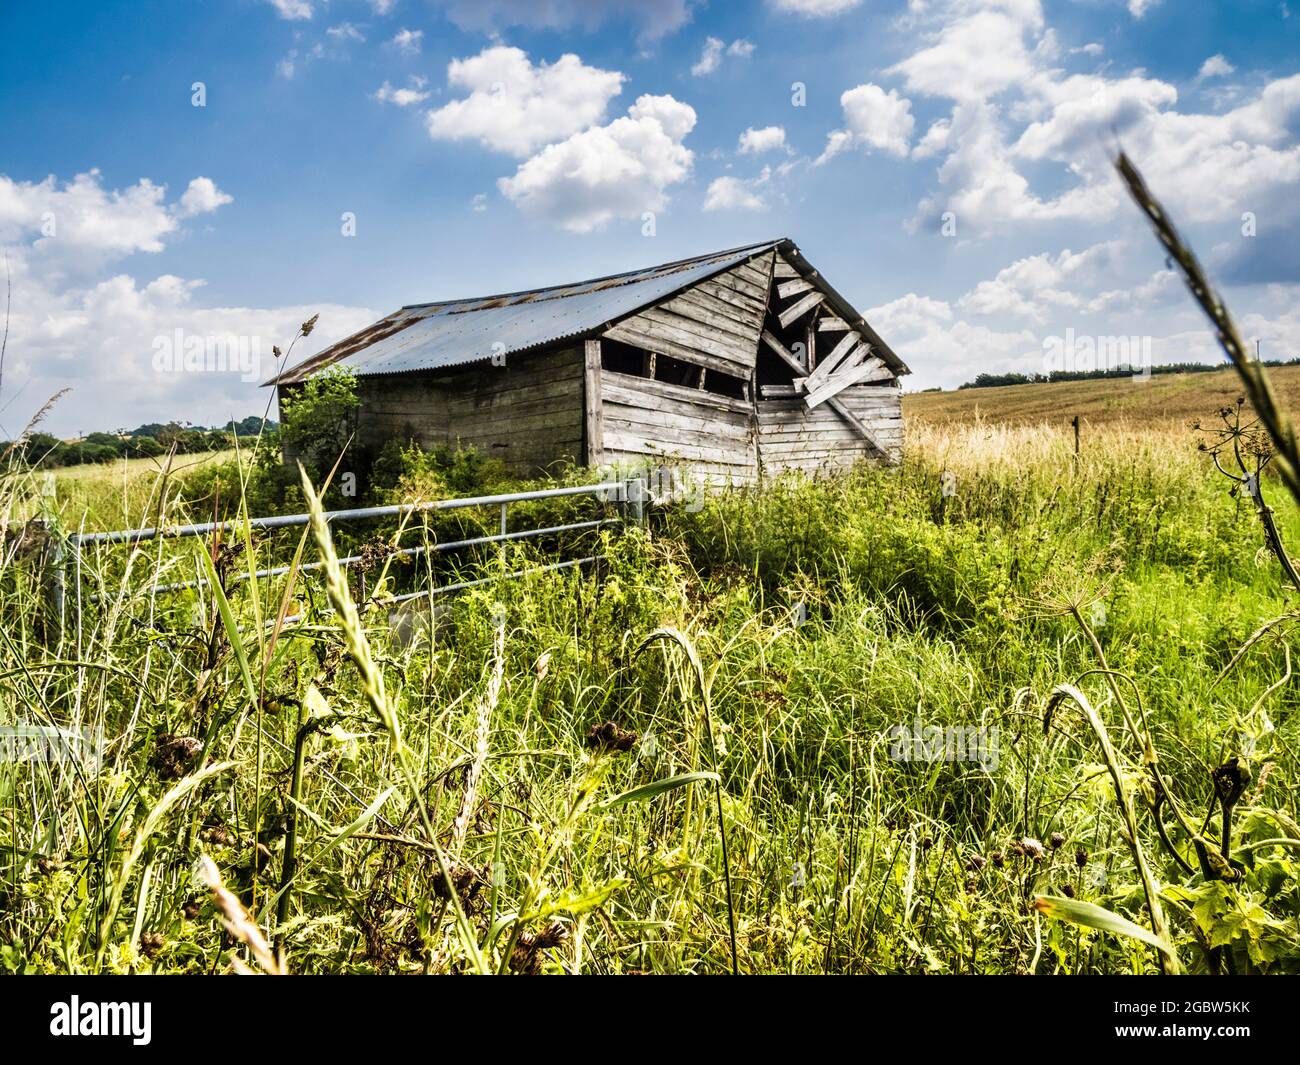 A dilapidated barn on the edge of a field. Stock Photo